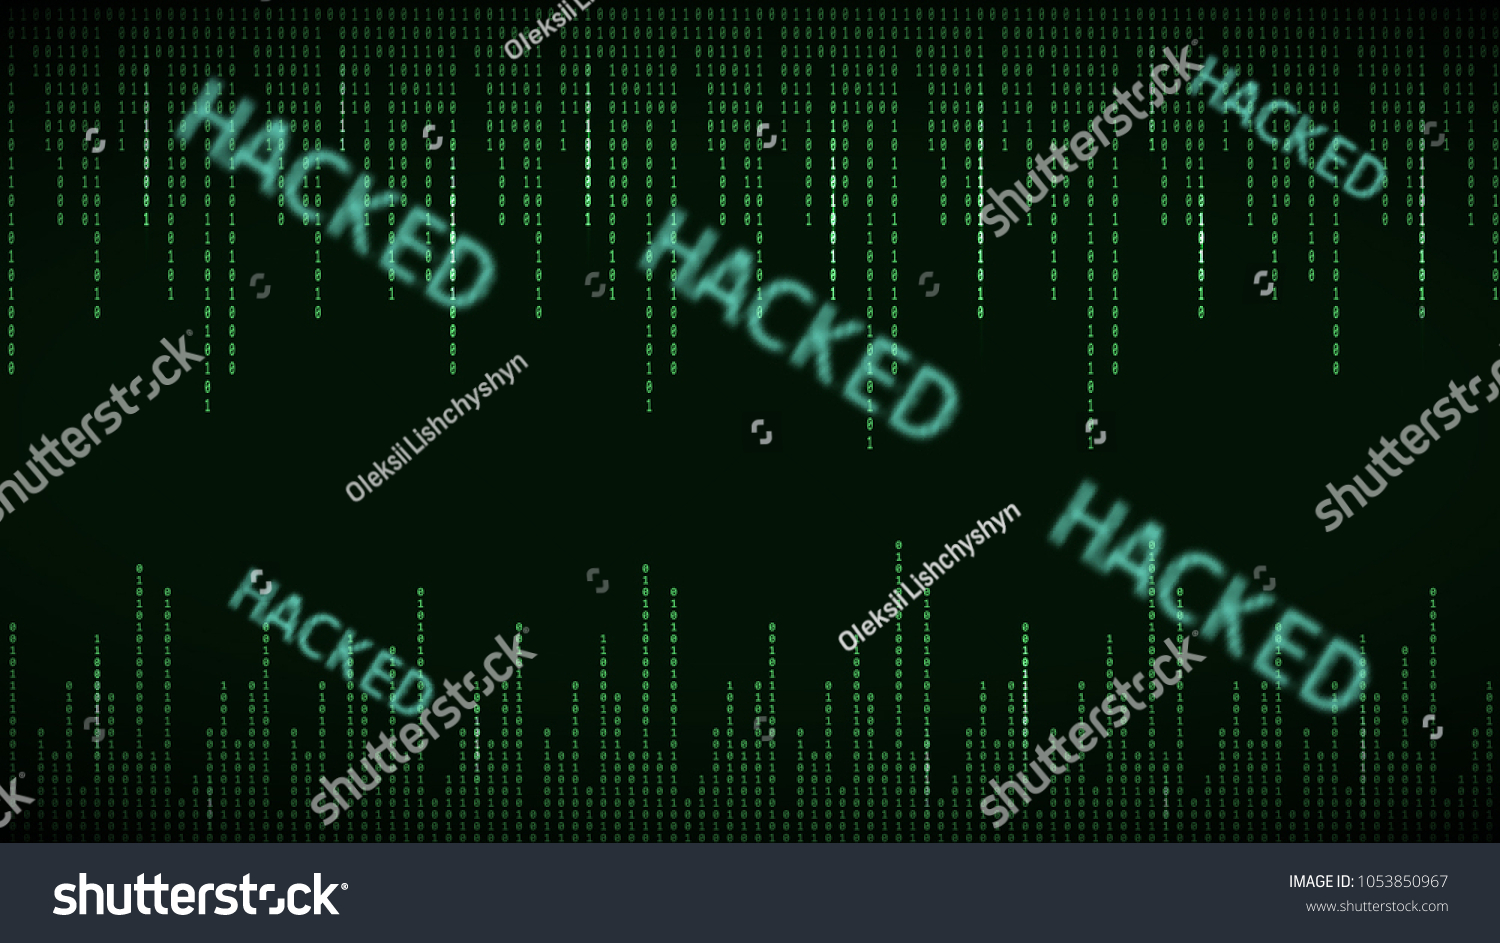 Hacked Glitched Abstract Digital Background Computer Stock Vector ...